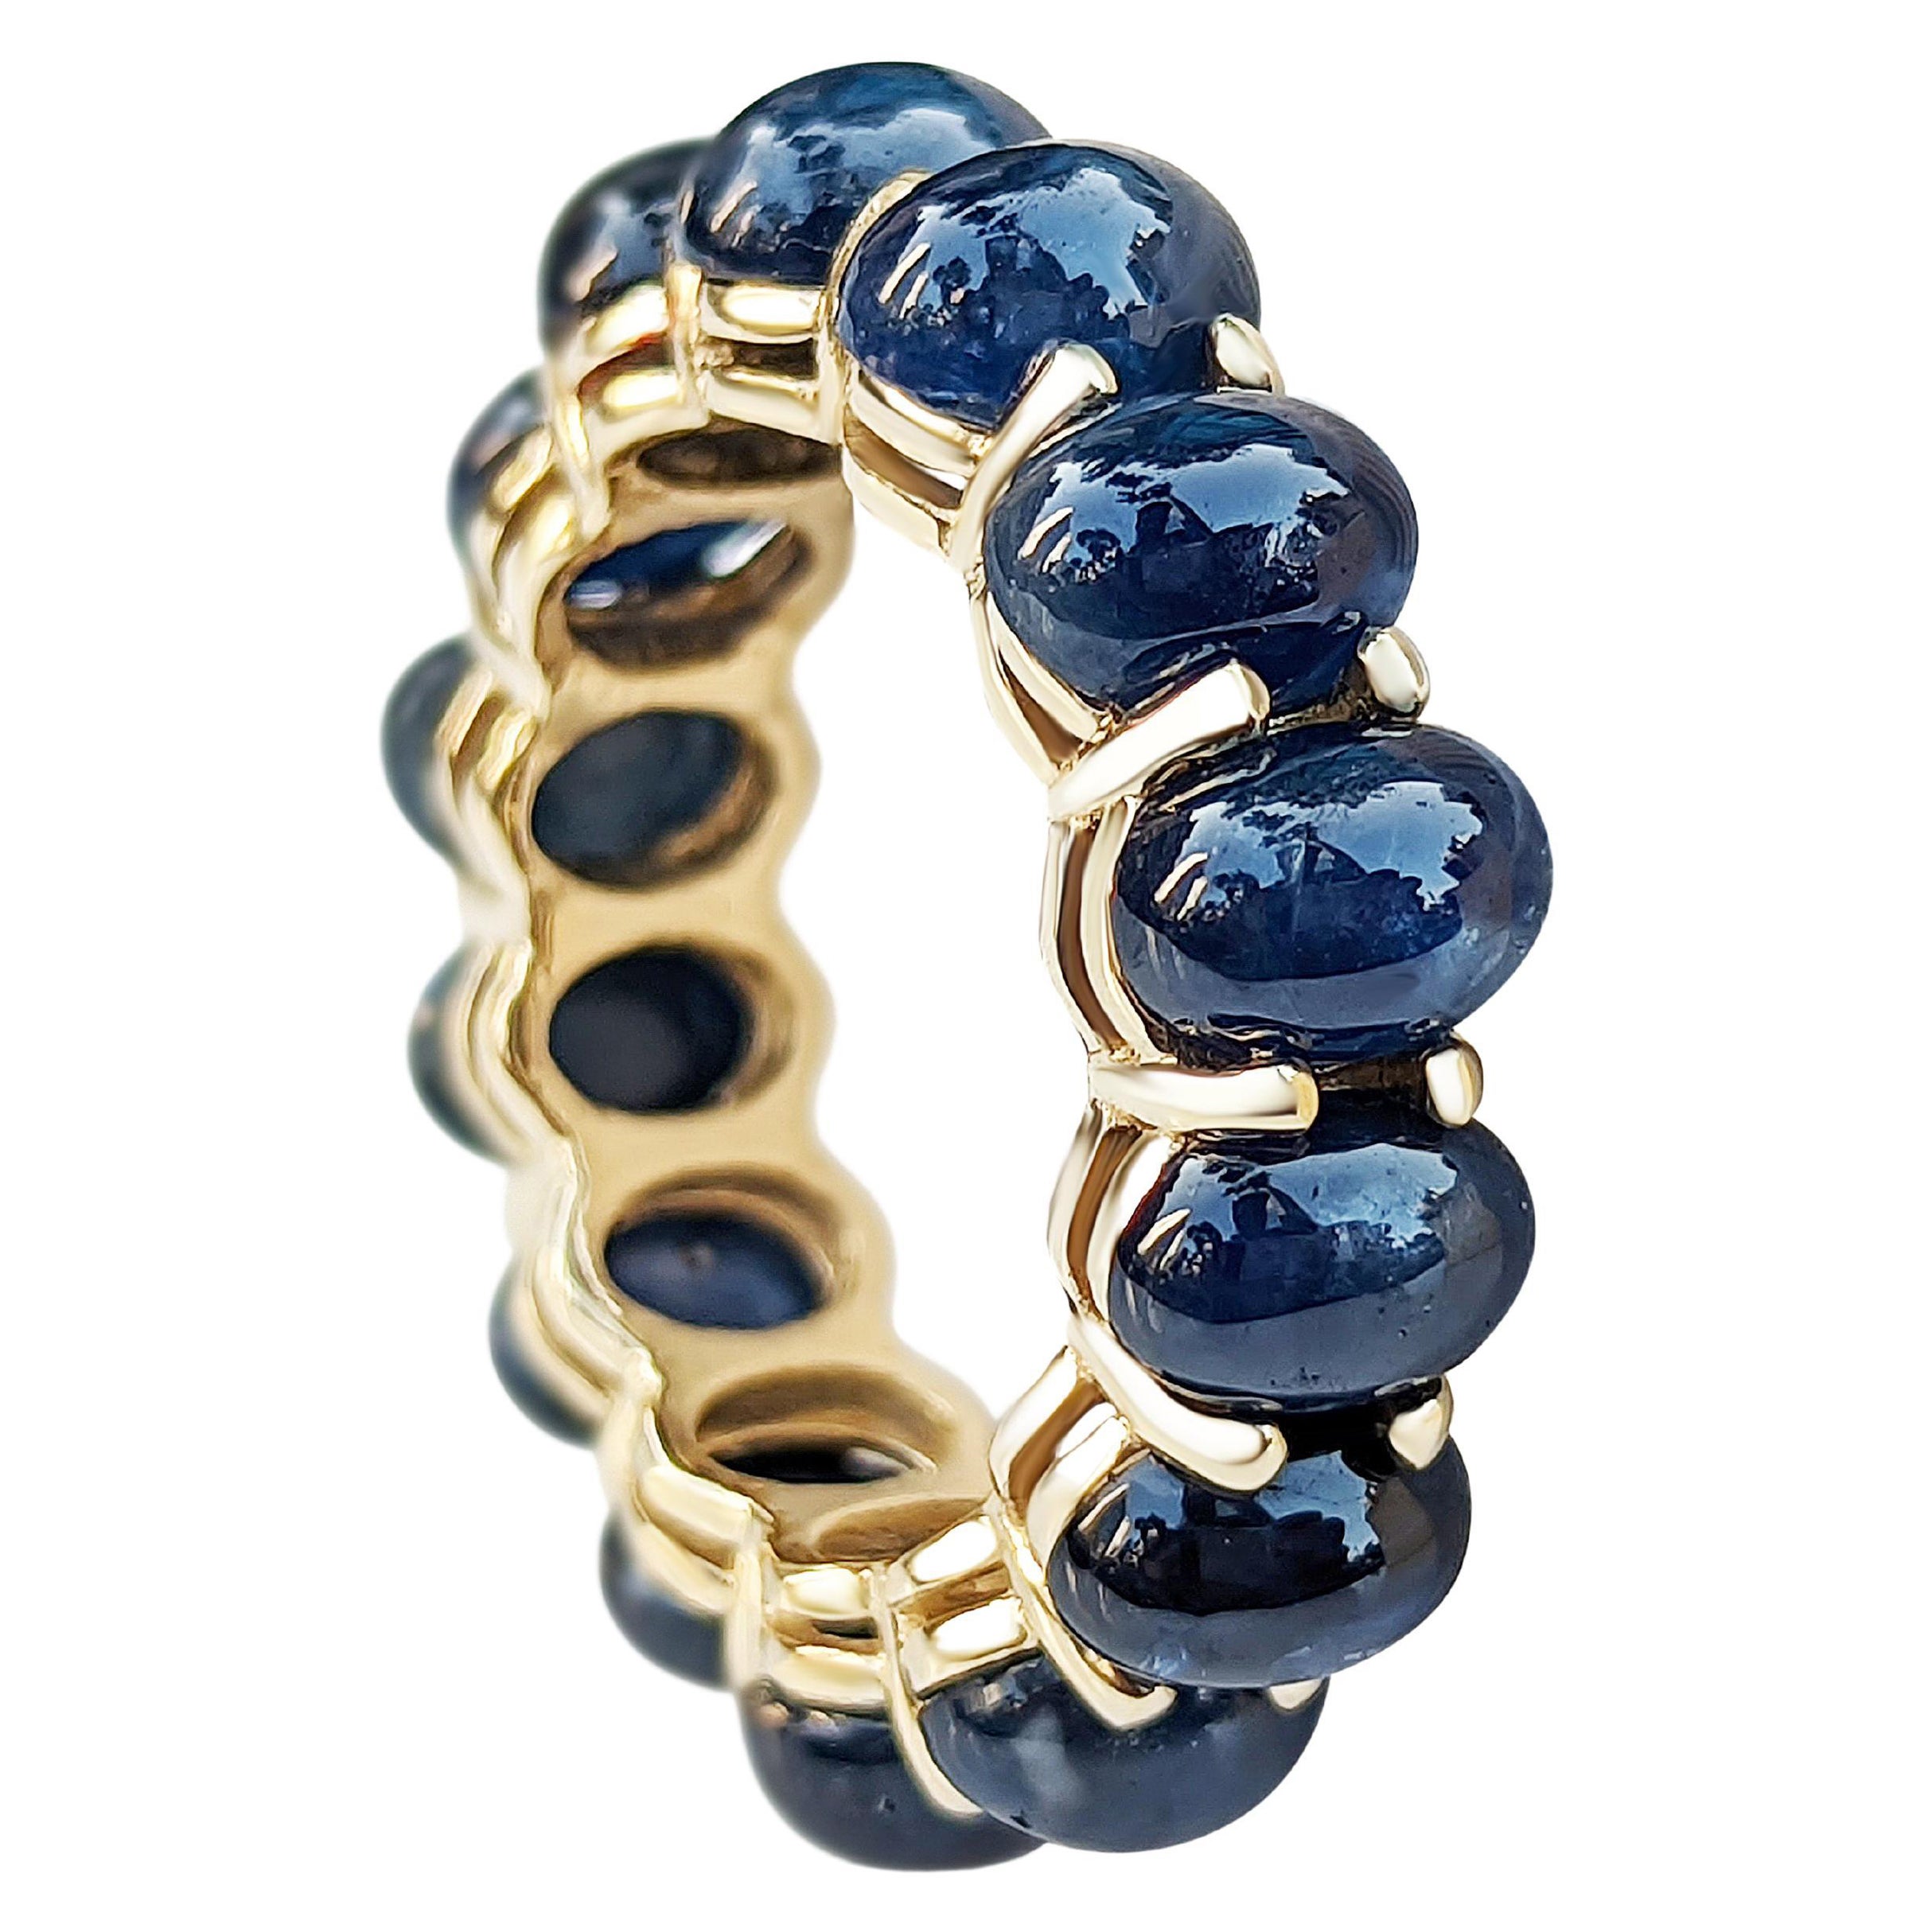 19.11 Carat Magnificent Blue Sapphire Eternity Band, 14Kt Yellow Gold, Ring